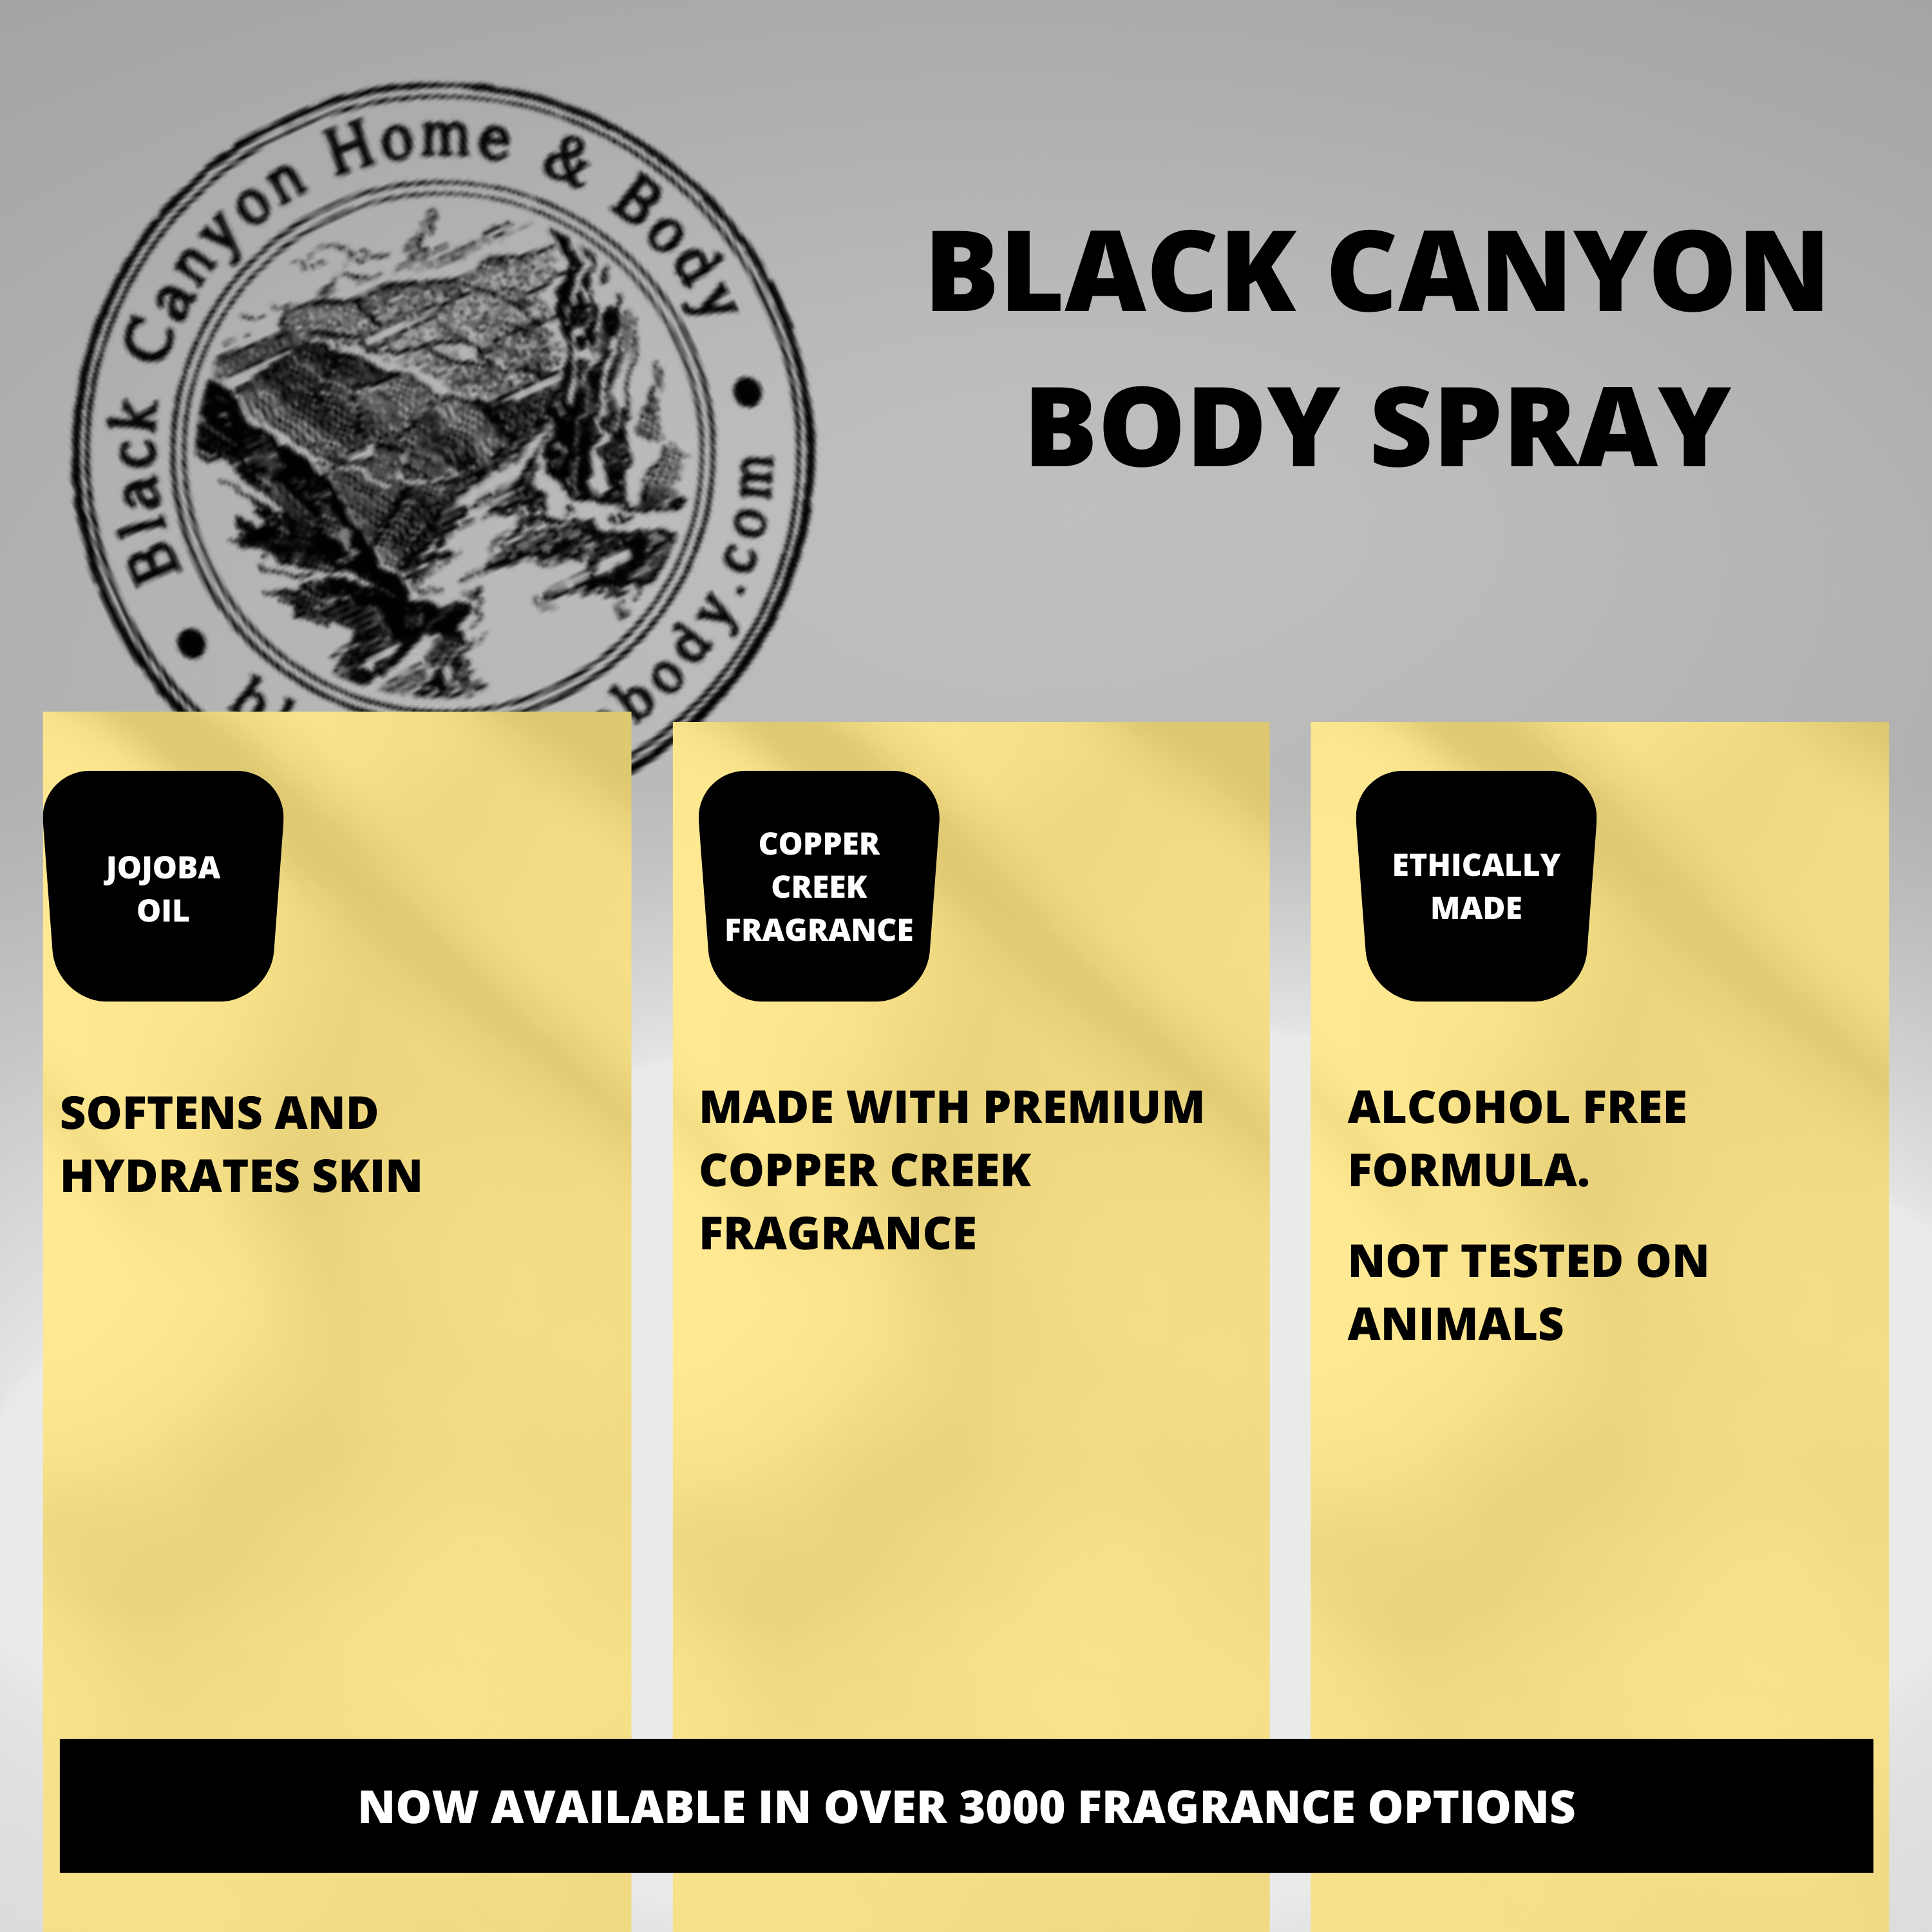 Black Canyon Black Currant & Cranberry Scented Body Spray